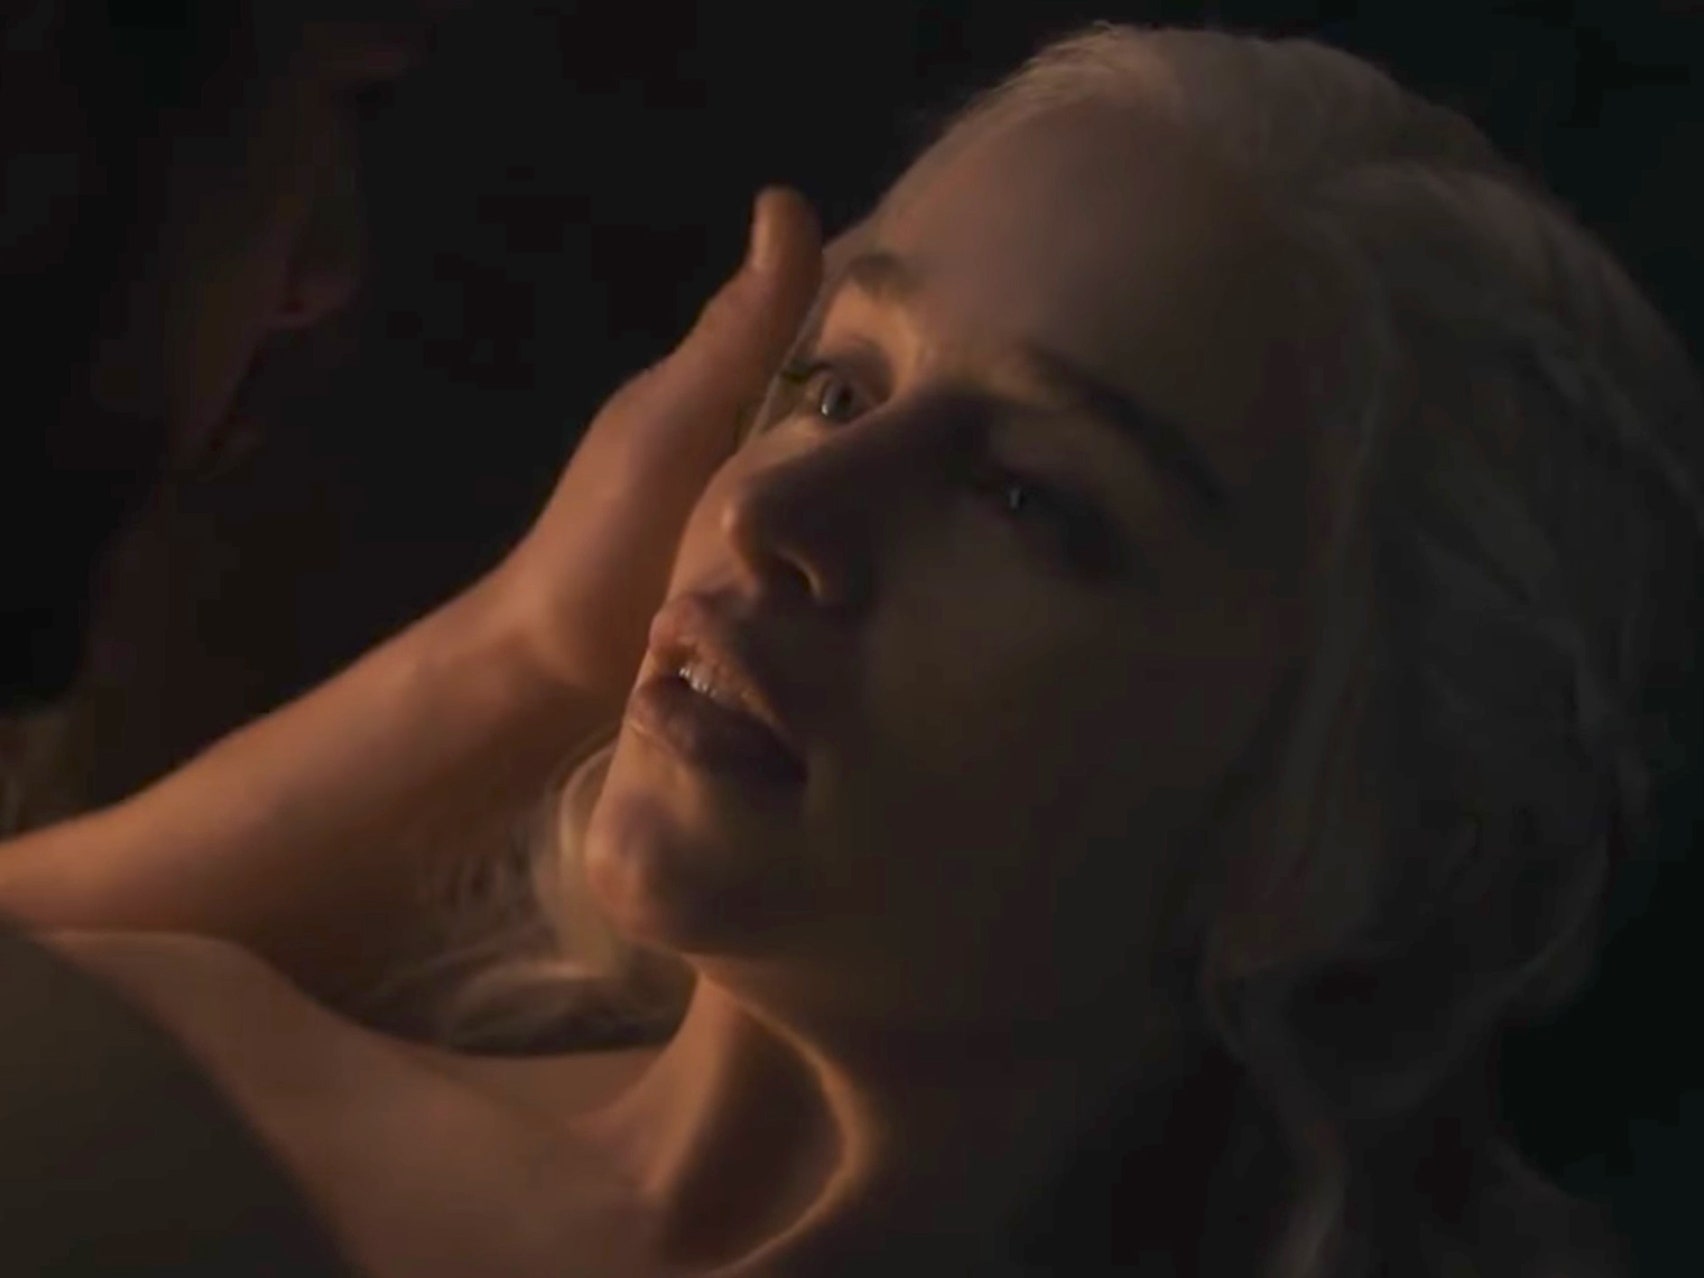 carol waring recommends Sex Game Of Thrones Episode